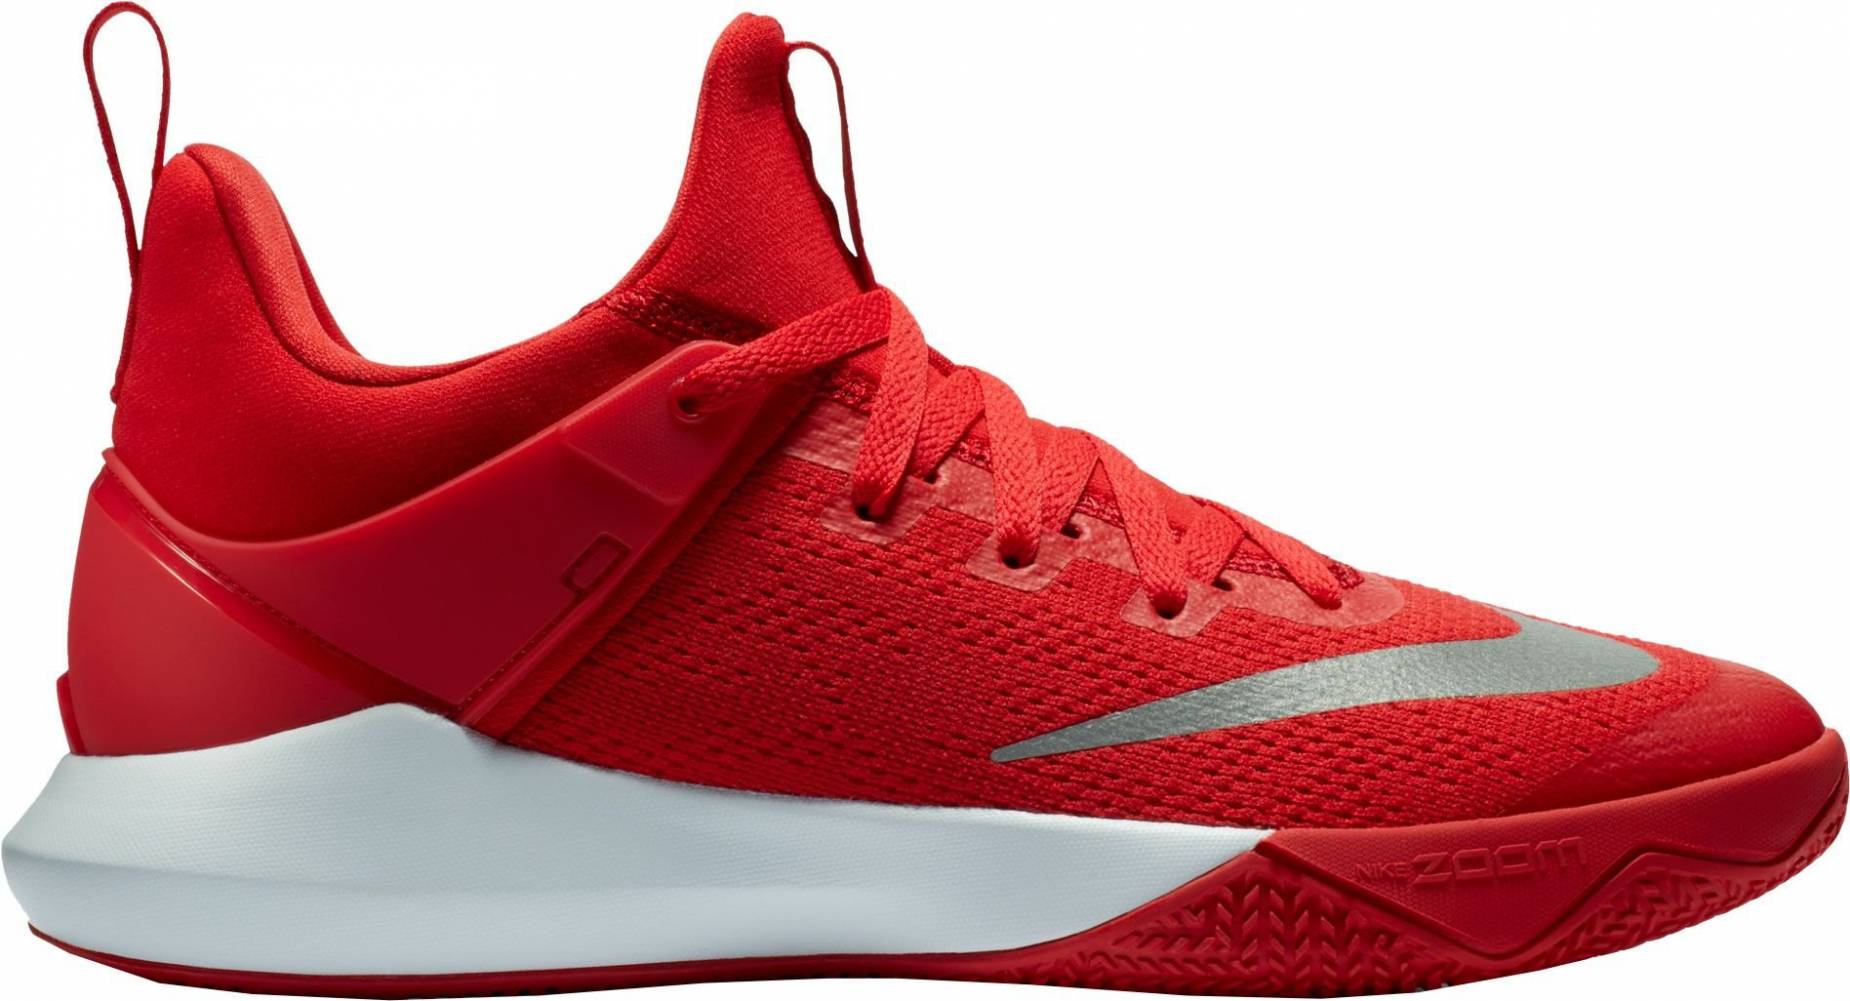 red and white basketball shoes